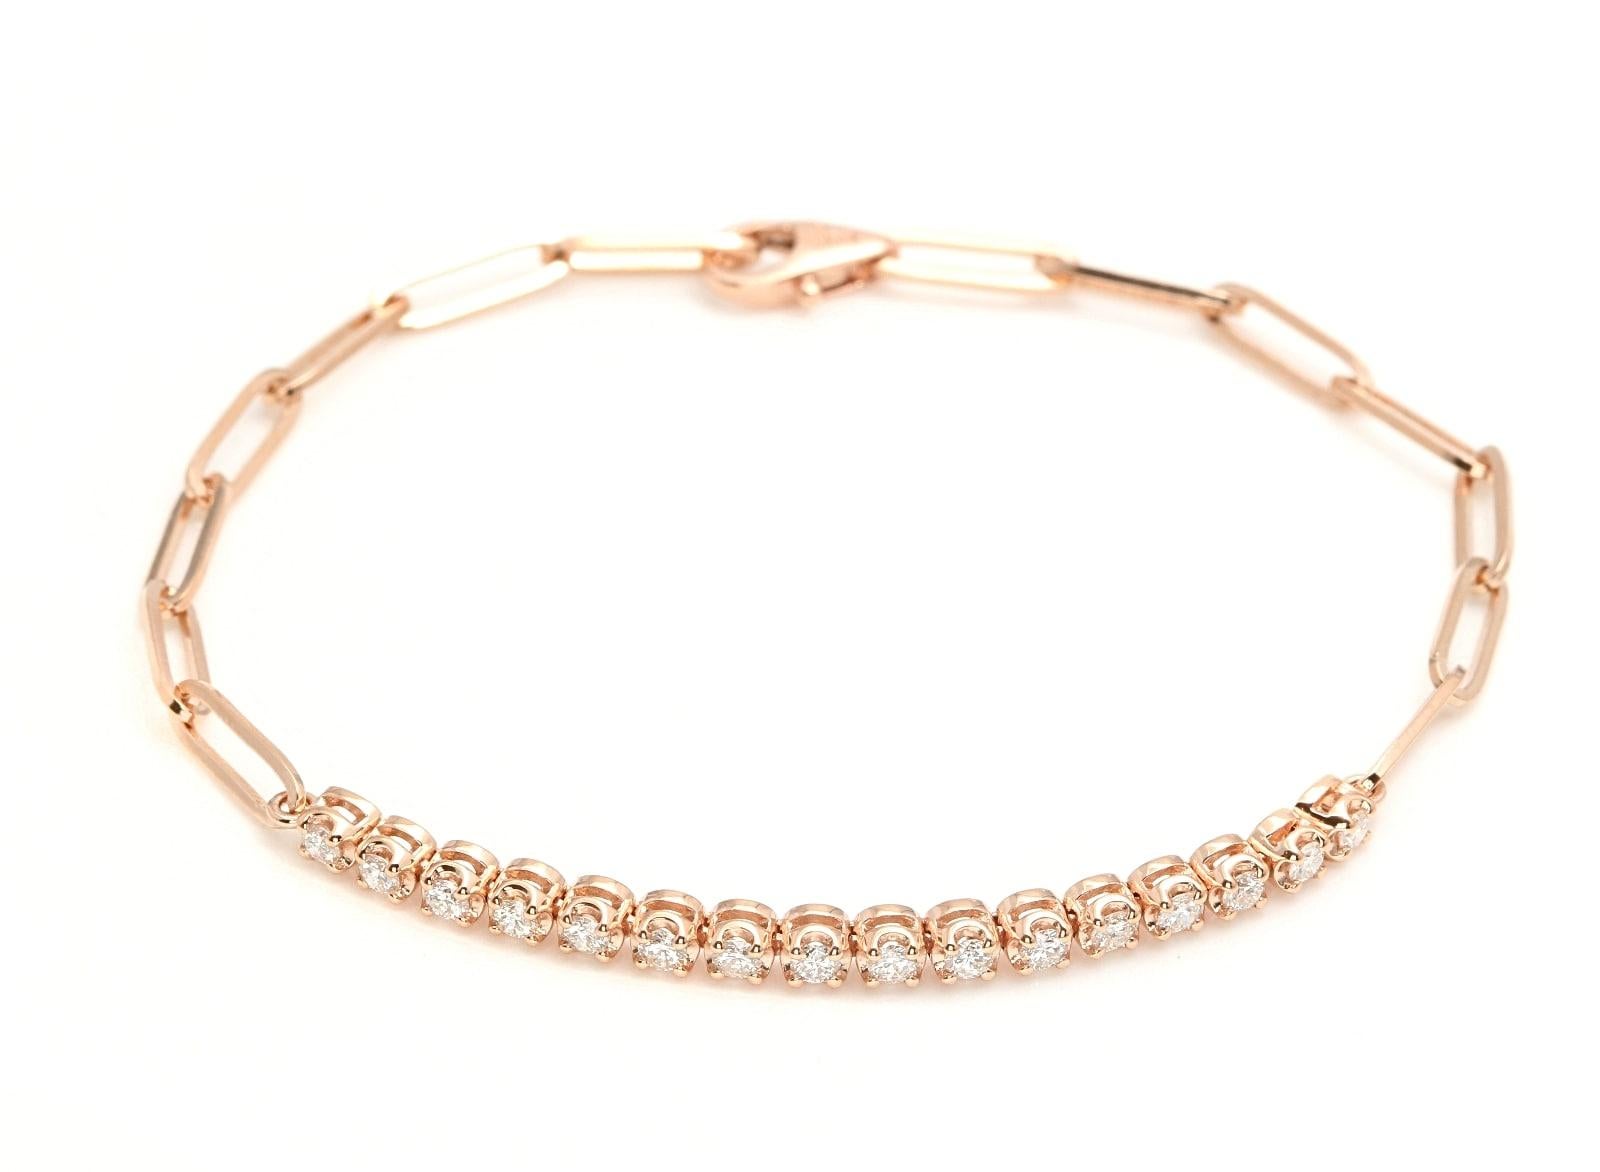 0.60 Carats Stunning Natural Diamond 14K Solid Rose Gold Tennis Paperclip Style Bracelet 

Suggested Replacement Value: Approx. $5,000.00

STAMPED: 14K

Total Natural Round Diamonds Weight: Approx. 0.60 Carats ( 16pcs. ) (color G-H / Clarity